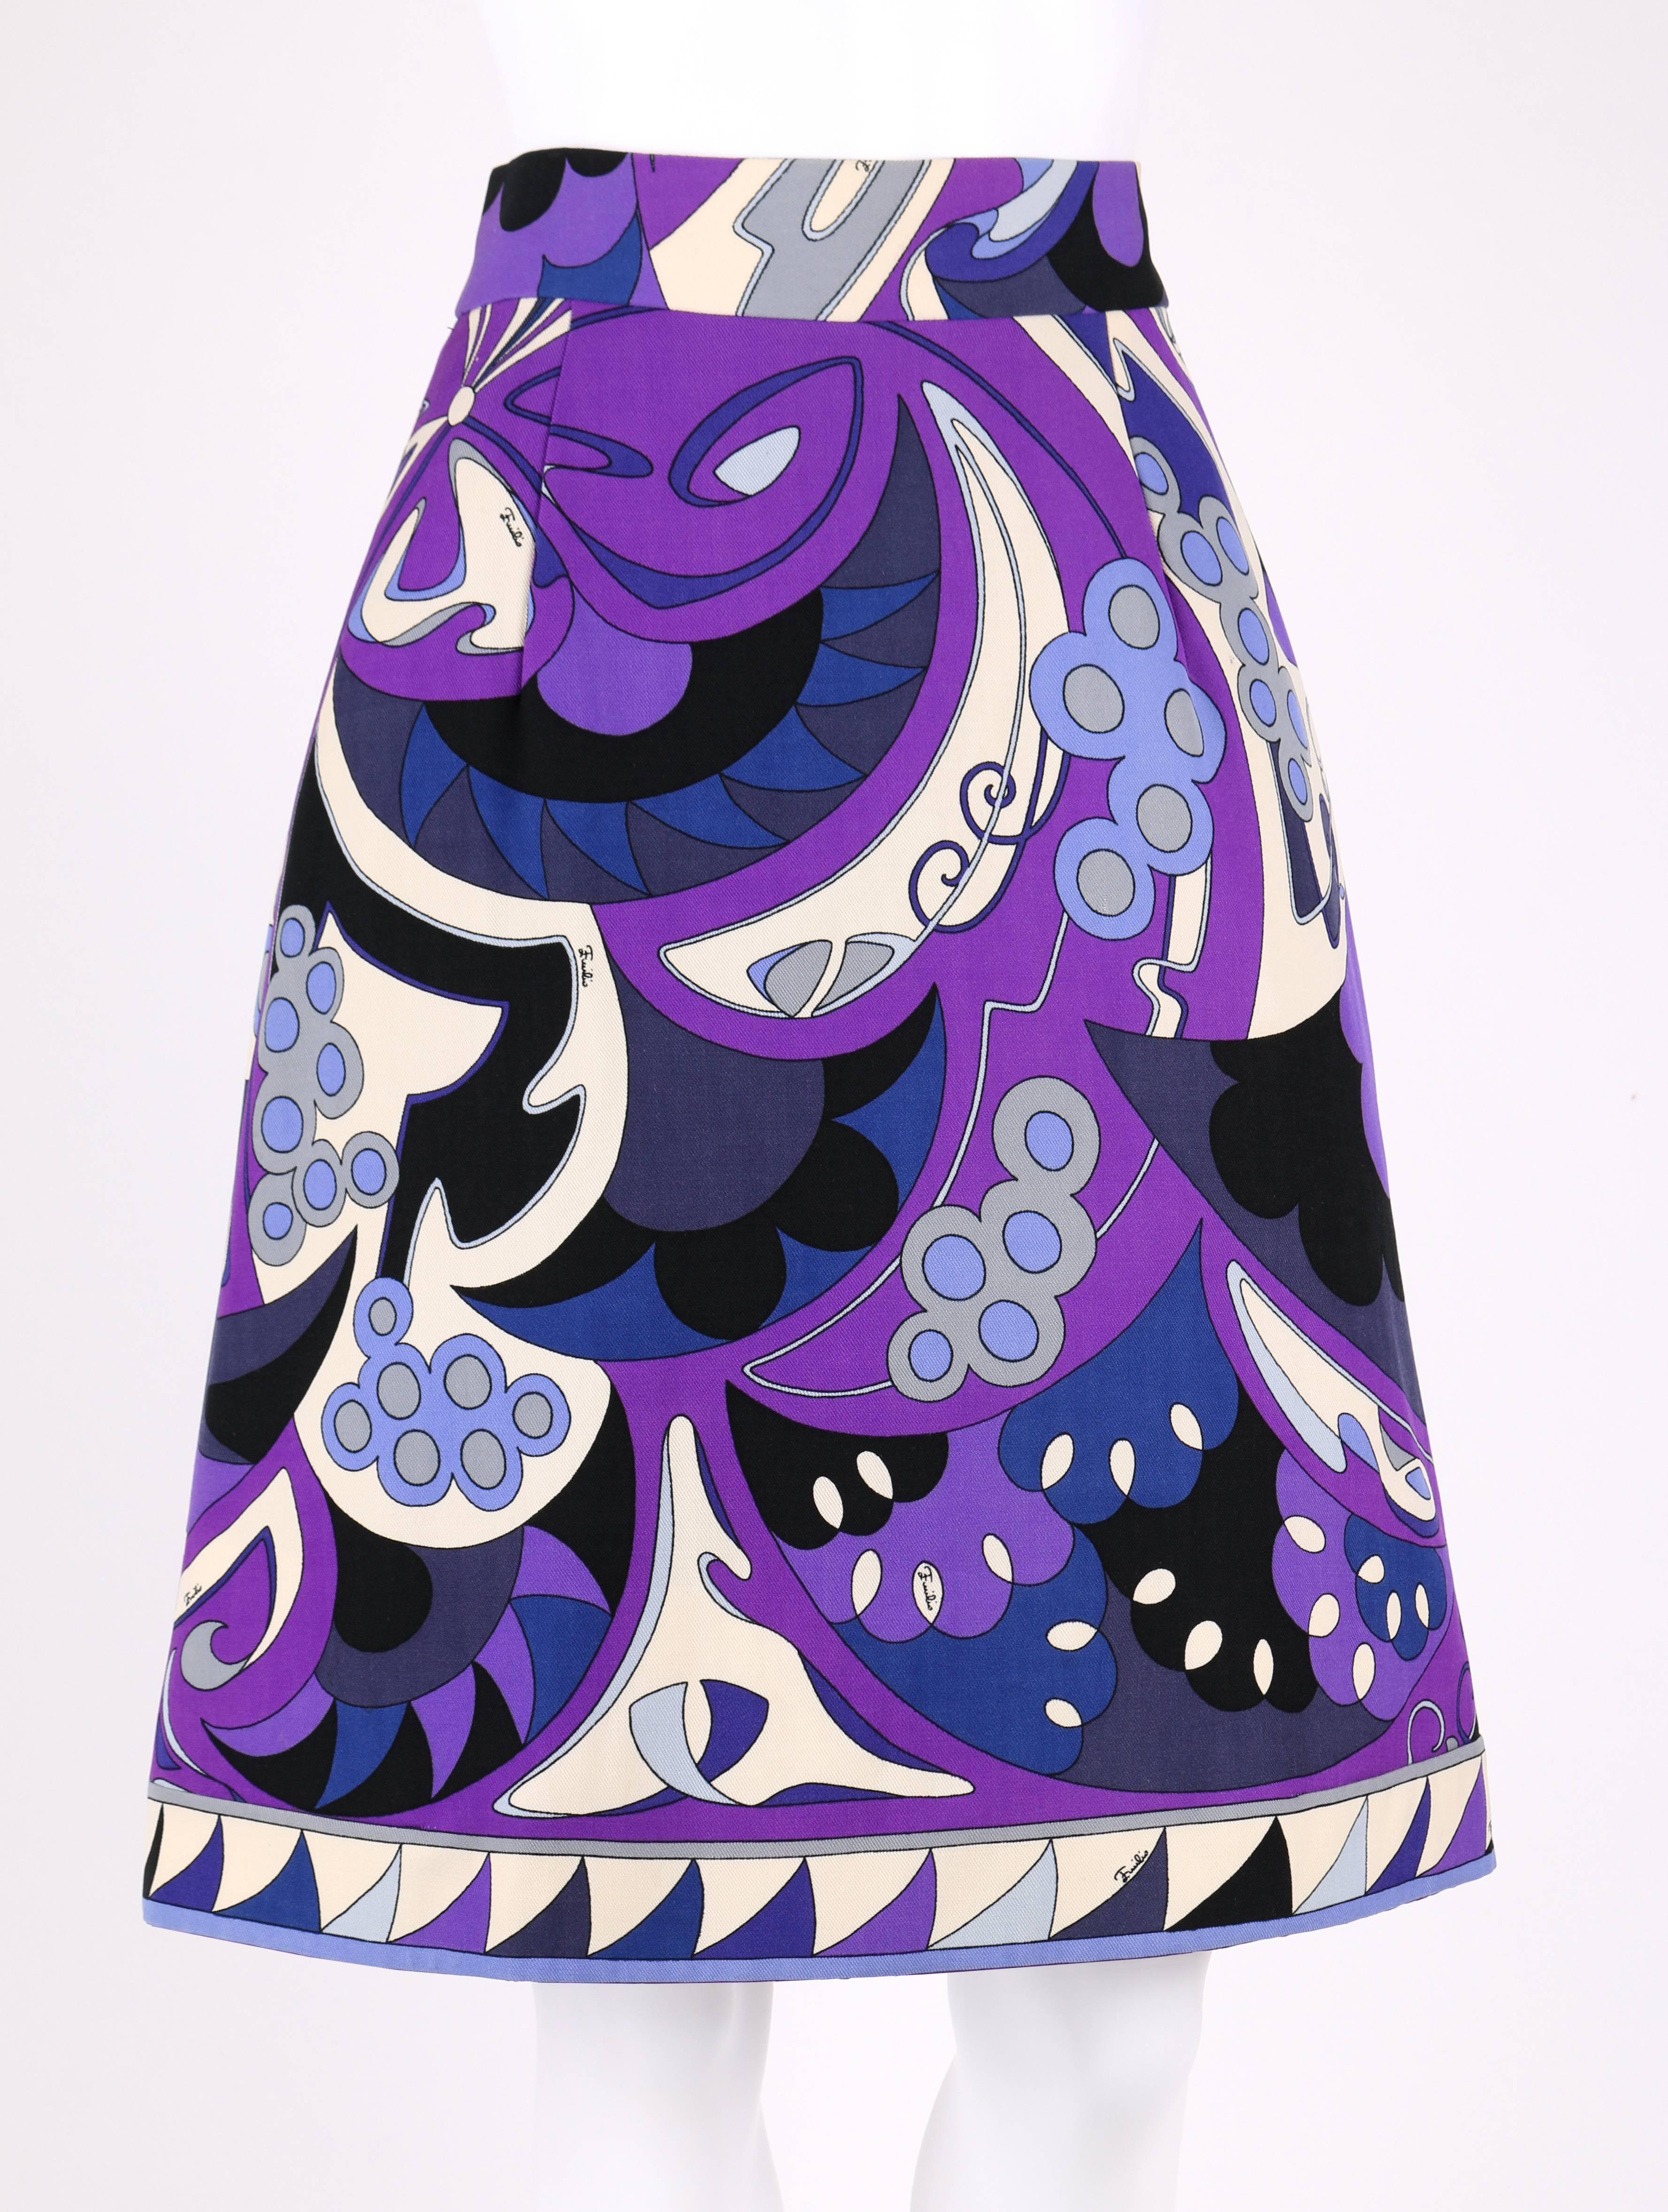 Vintage c.1960s Emilio Pucci purple and blue Mediterranean motif signature print wool skirt. Decorative border along hemline and zipper. Back center zip with snap and hook and eye. Fully Lined. Please note that this item was clipped to better fit